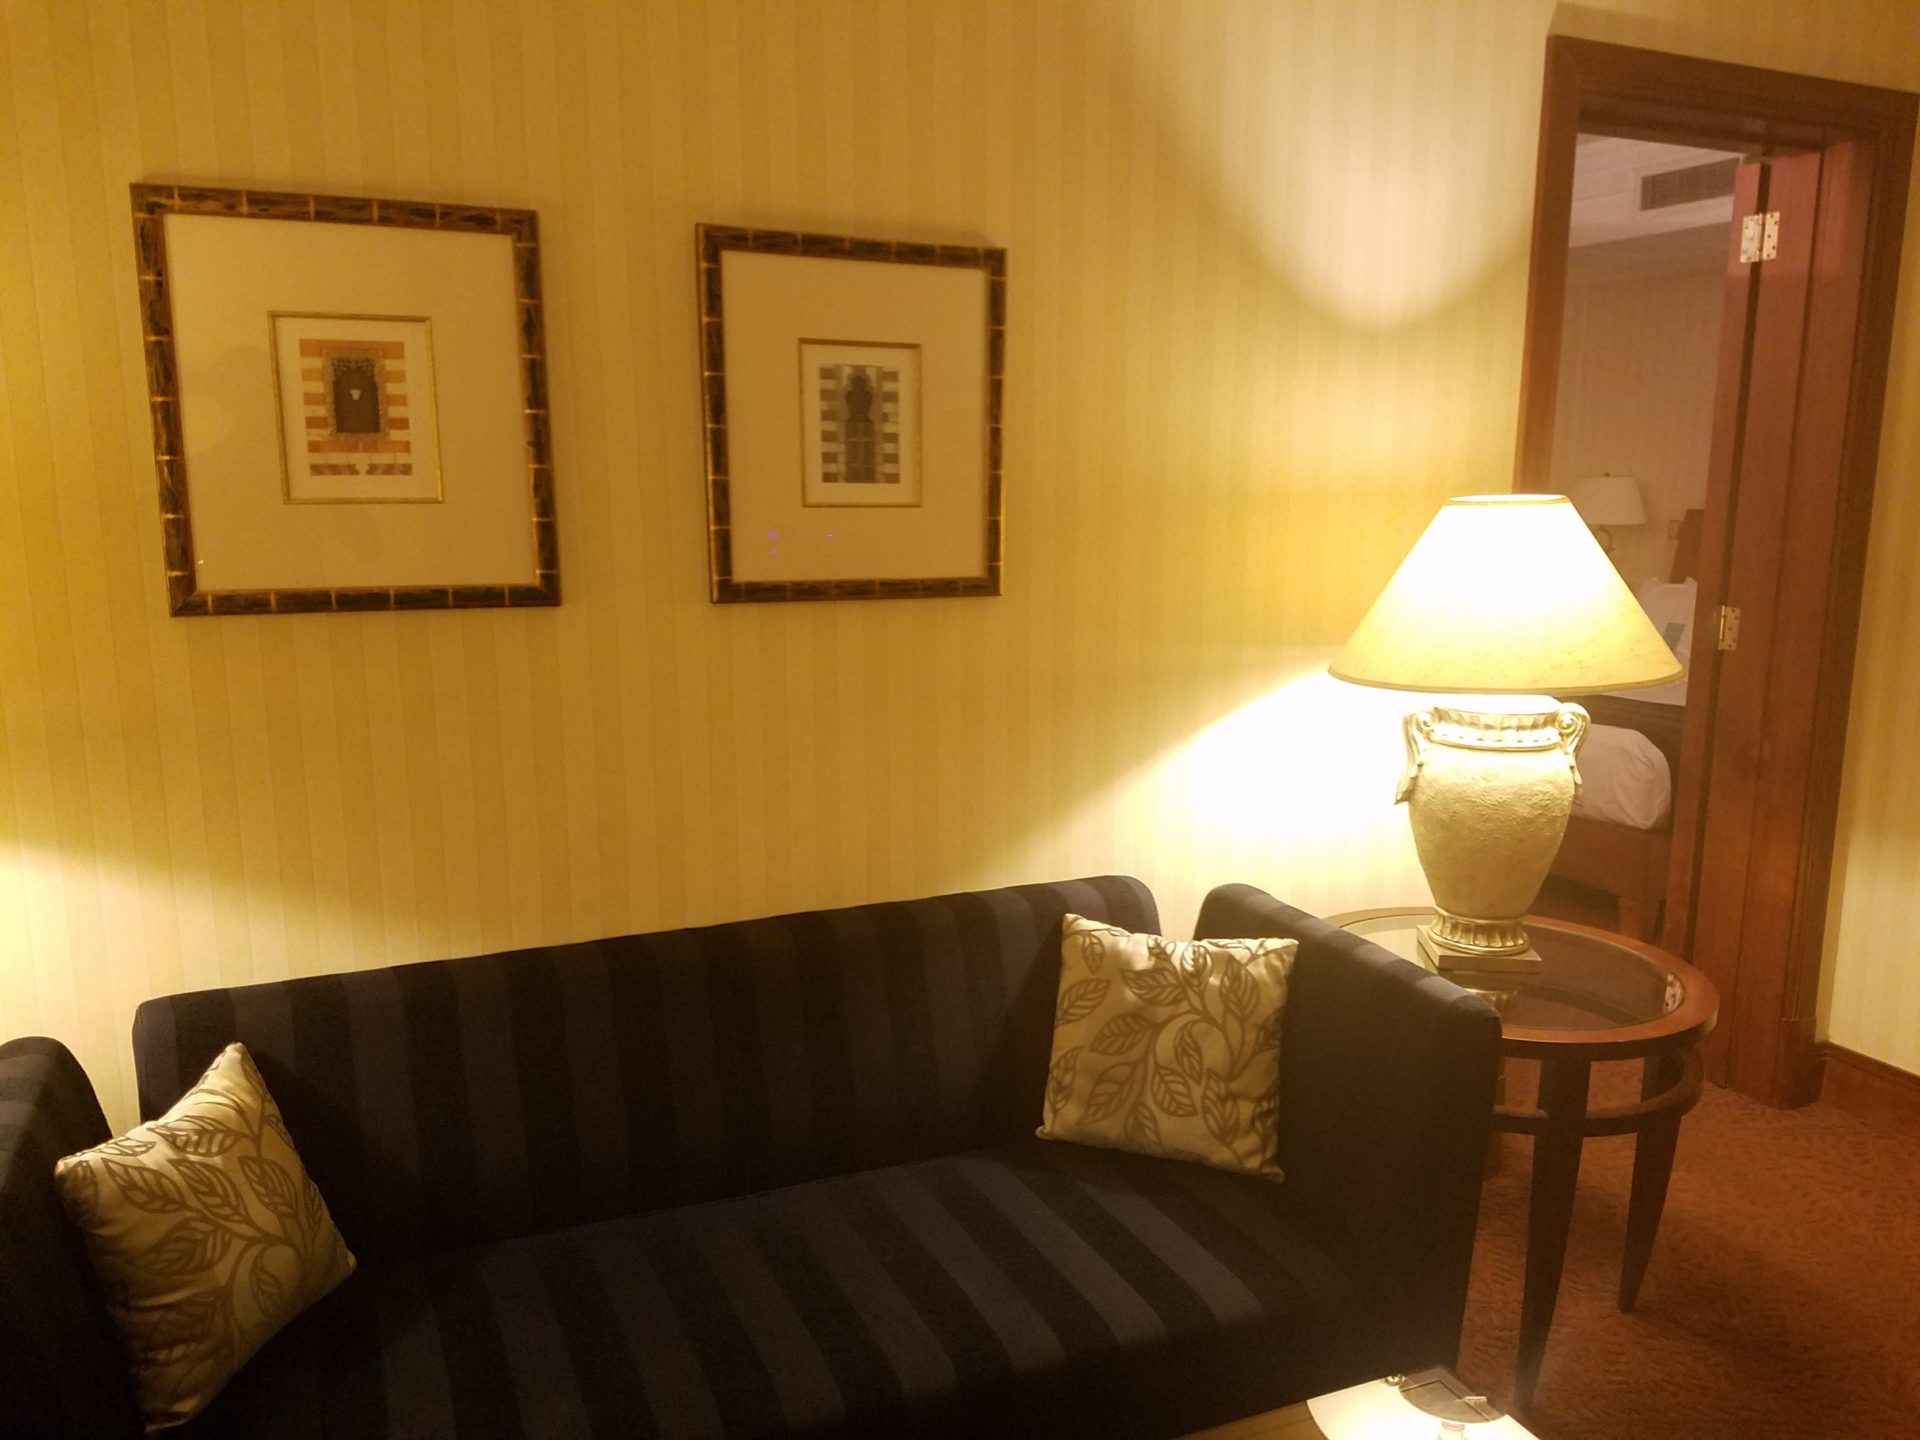 a couch and lamp in a room